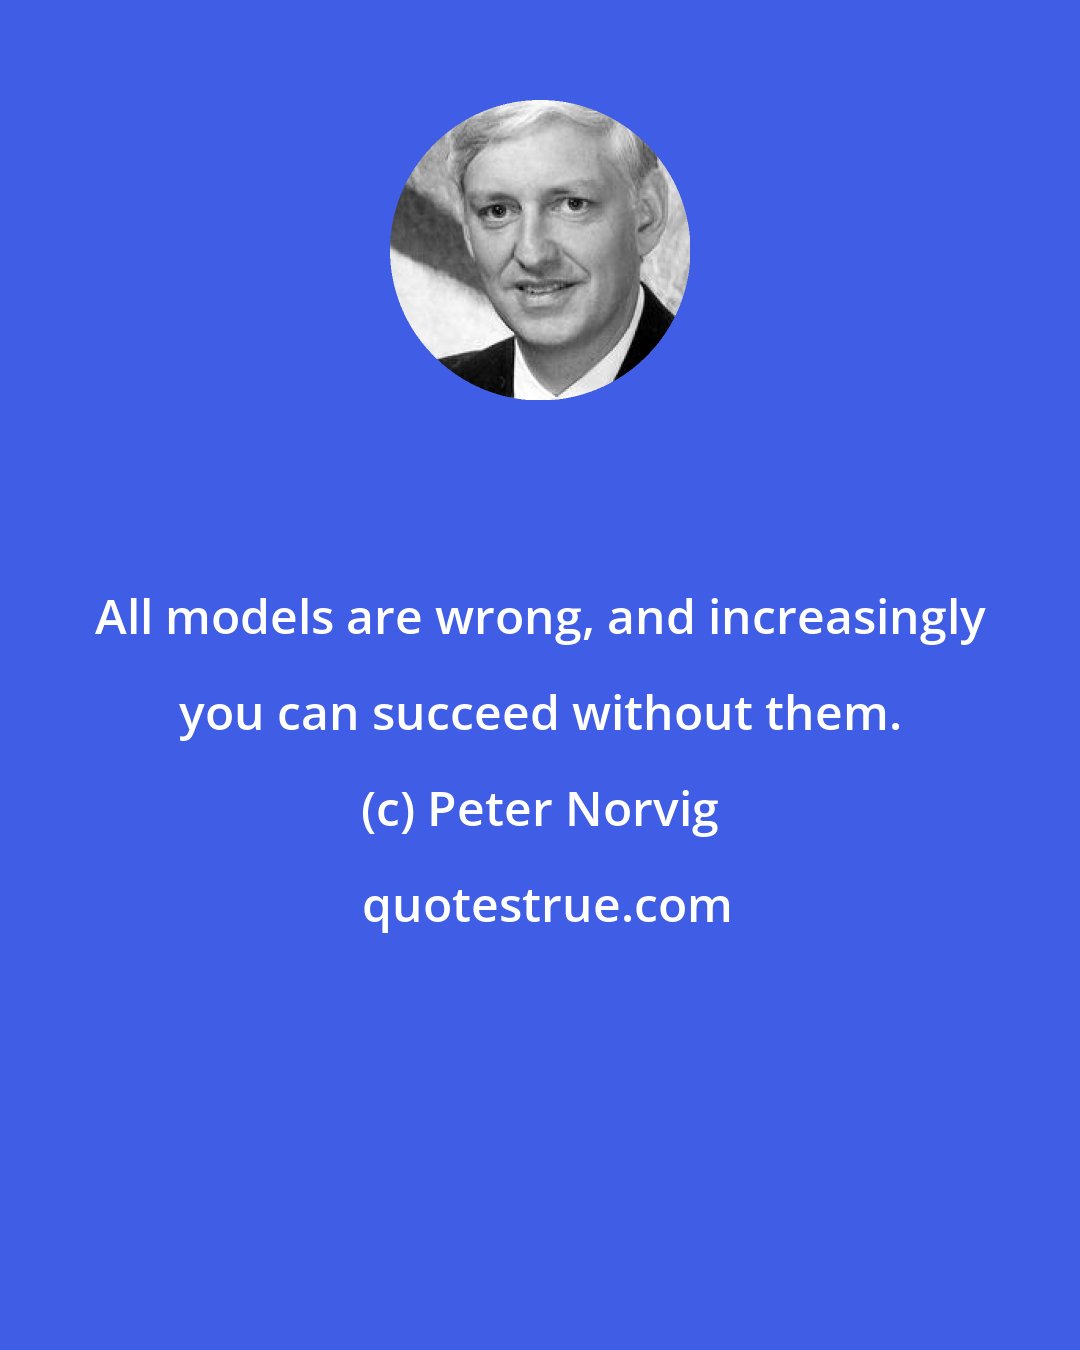 Peter Norvig: All models are wrong, and increasingly you can succeed without them.